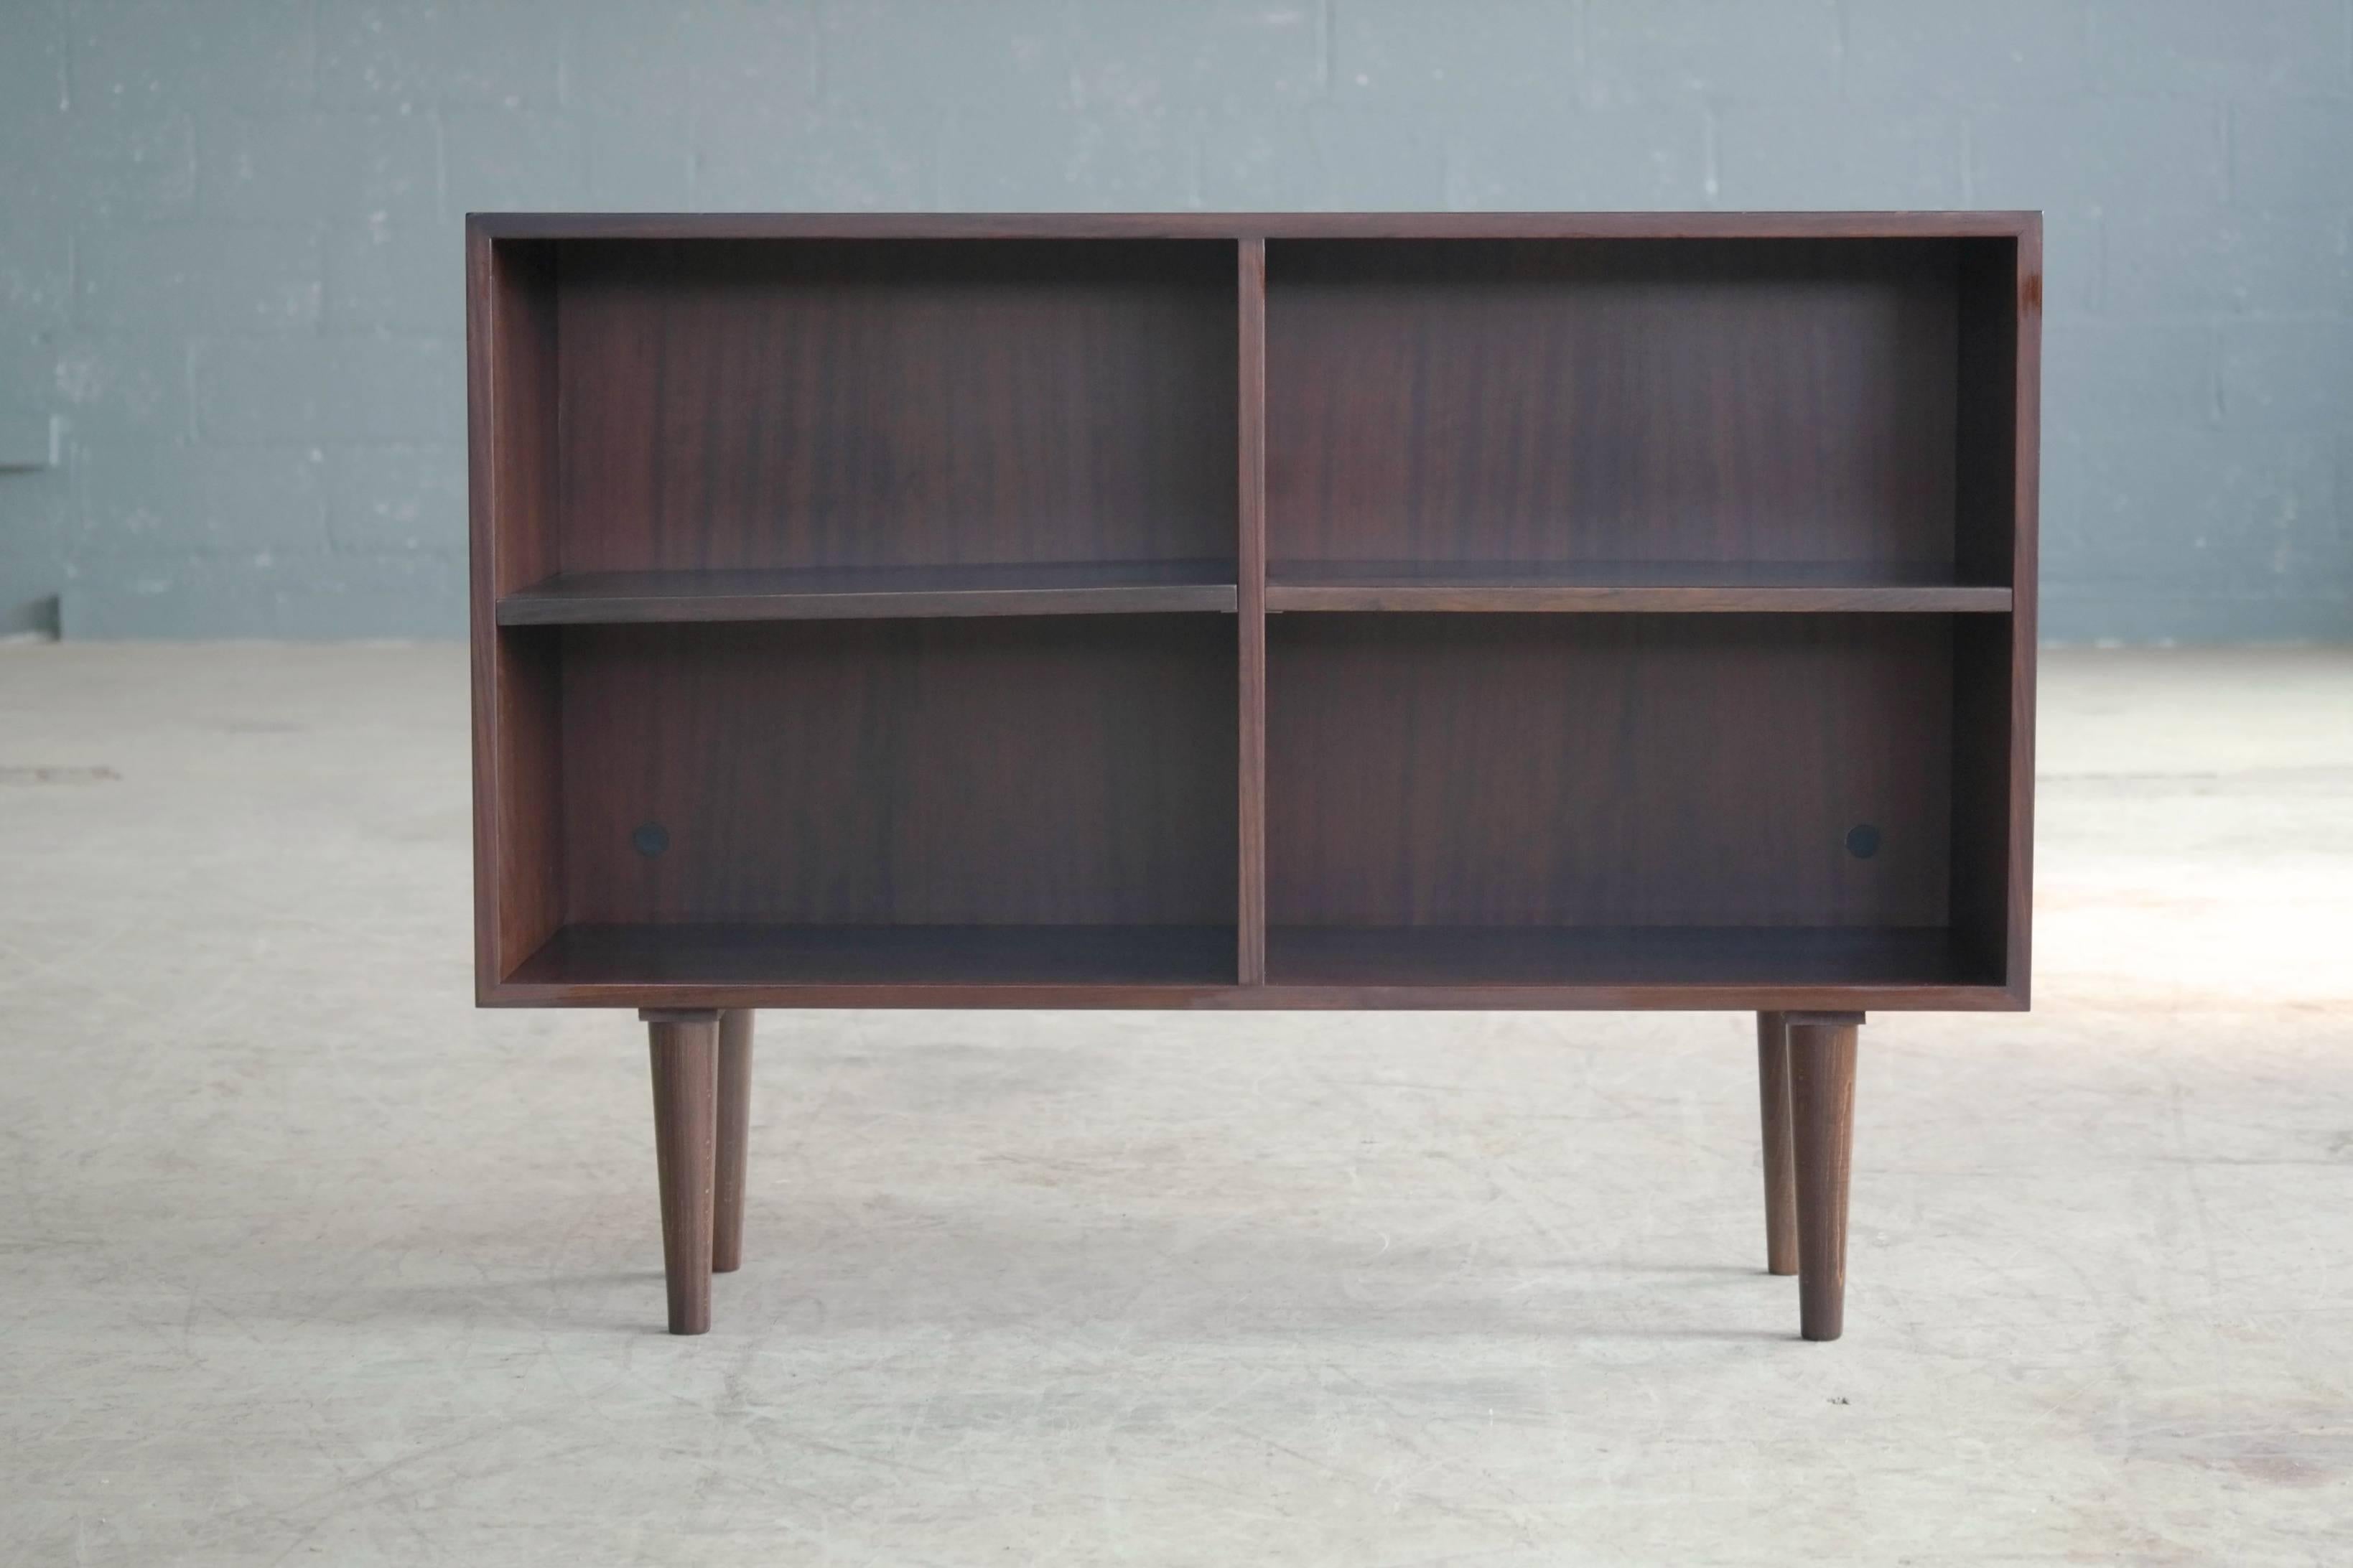 Very nice elegant rosewood bookcase in the style of Kai Kristiansen. Adjustable shelves. Very good condition with very minor age appropriate wear. We have a pair of matching bookcases without legs that are stackable with this one.